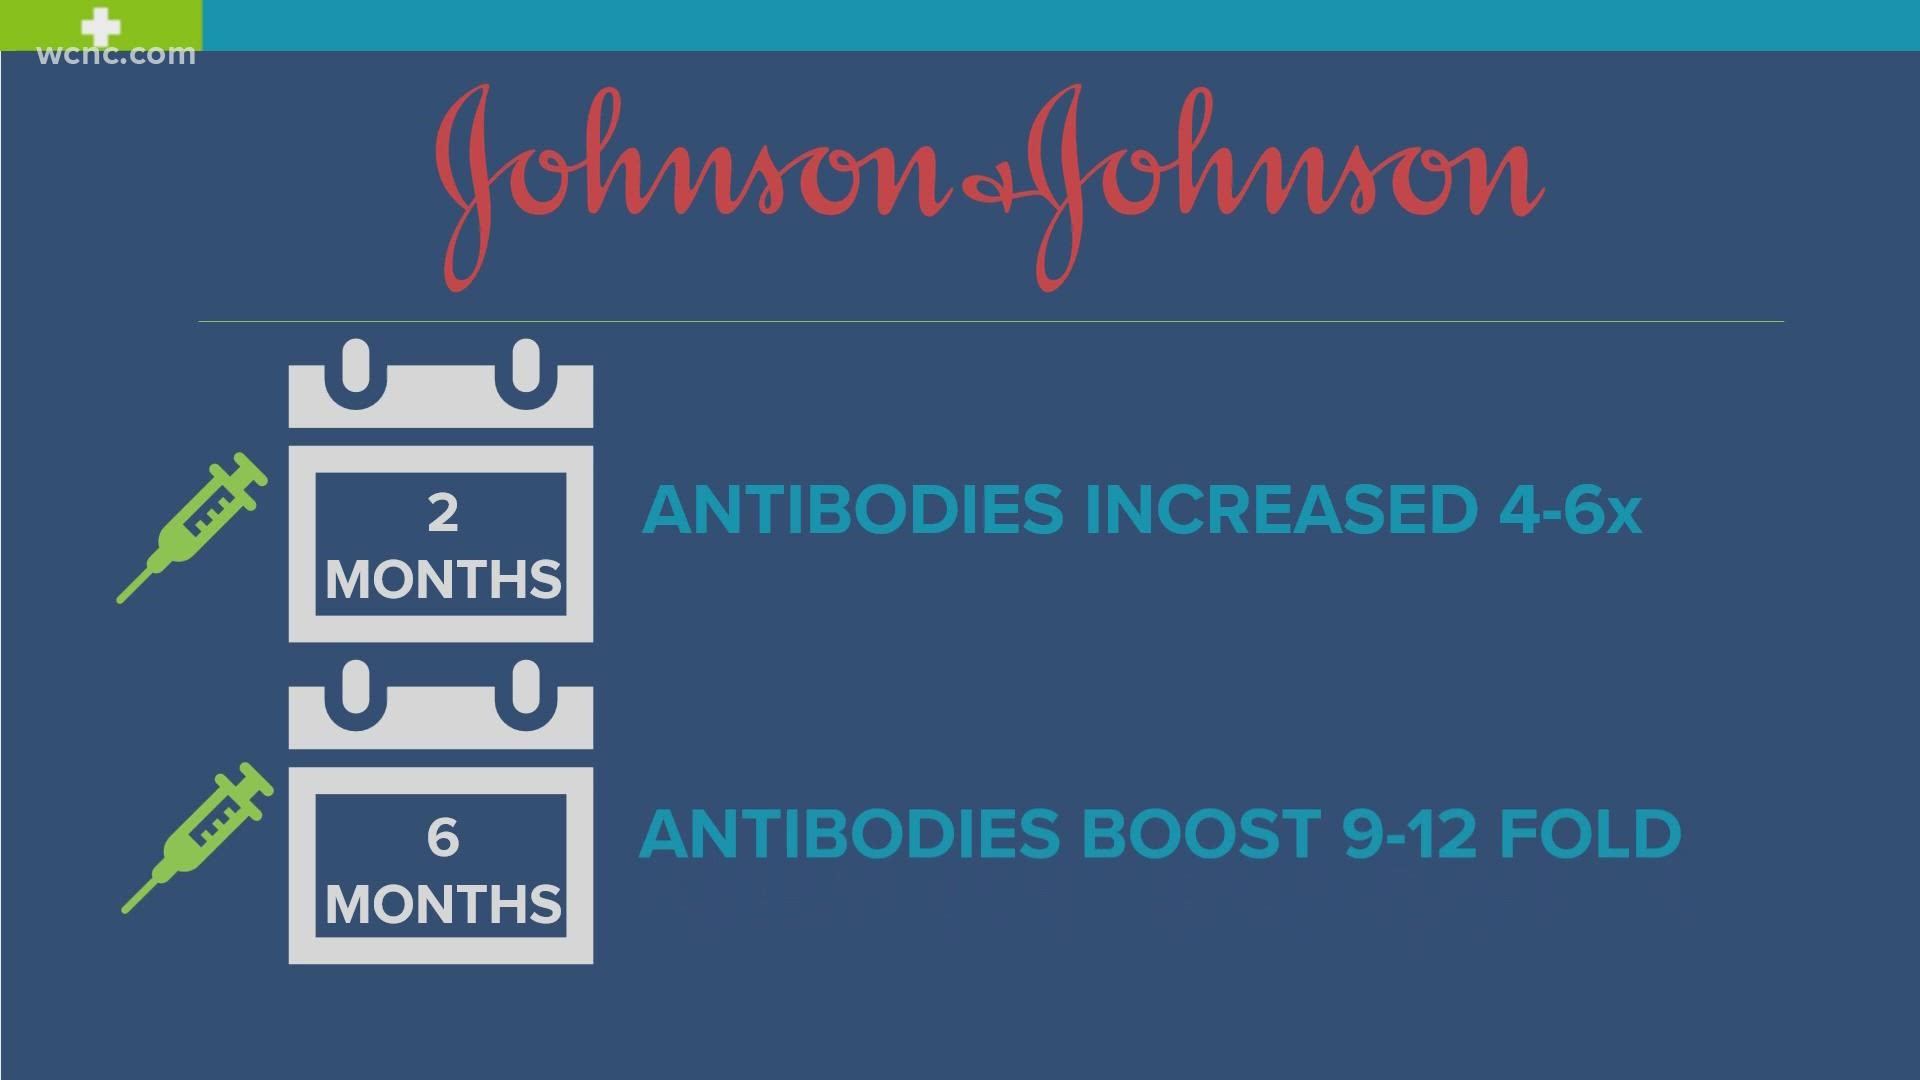 In less than two weeks, a FDA advisory committee will discuss authorizing a booster dose for the Moderna and Johnson & Johnson COVID-19 vaccines.